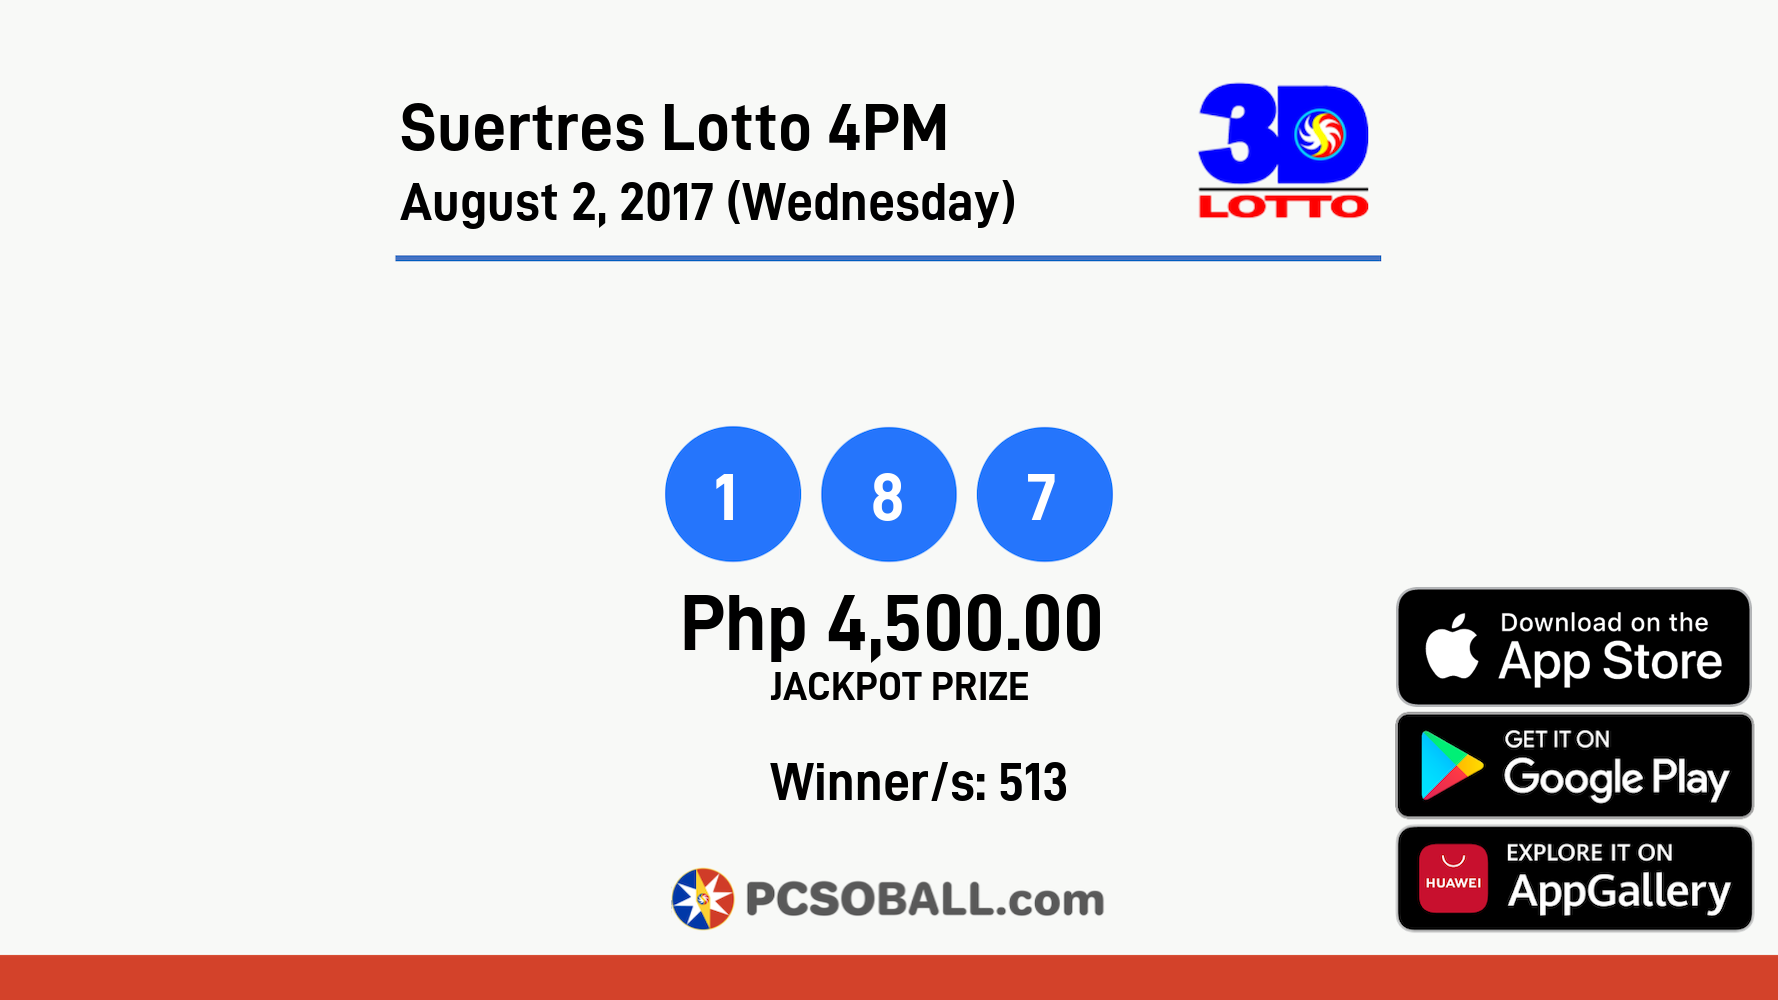 Suertres Lotto 4PM August 2, 2017 (Wednesday) Result